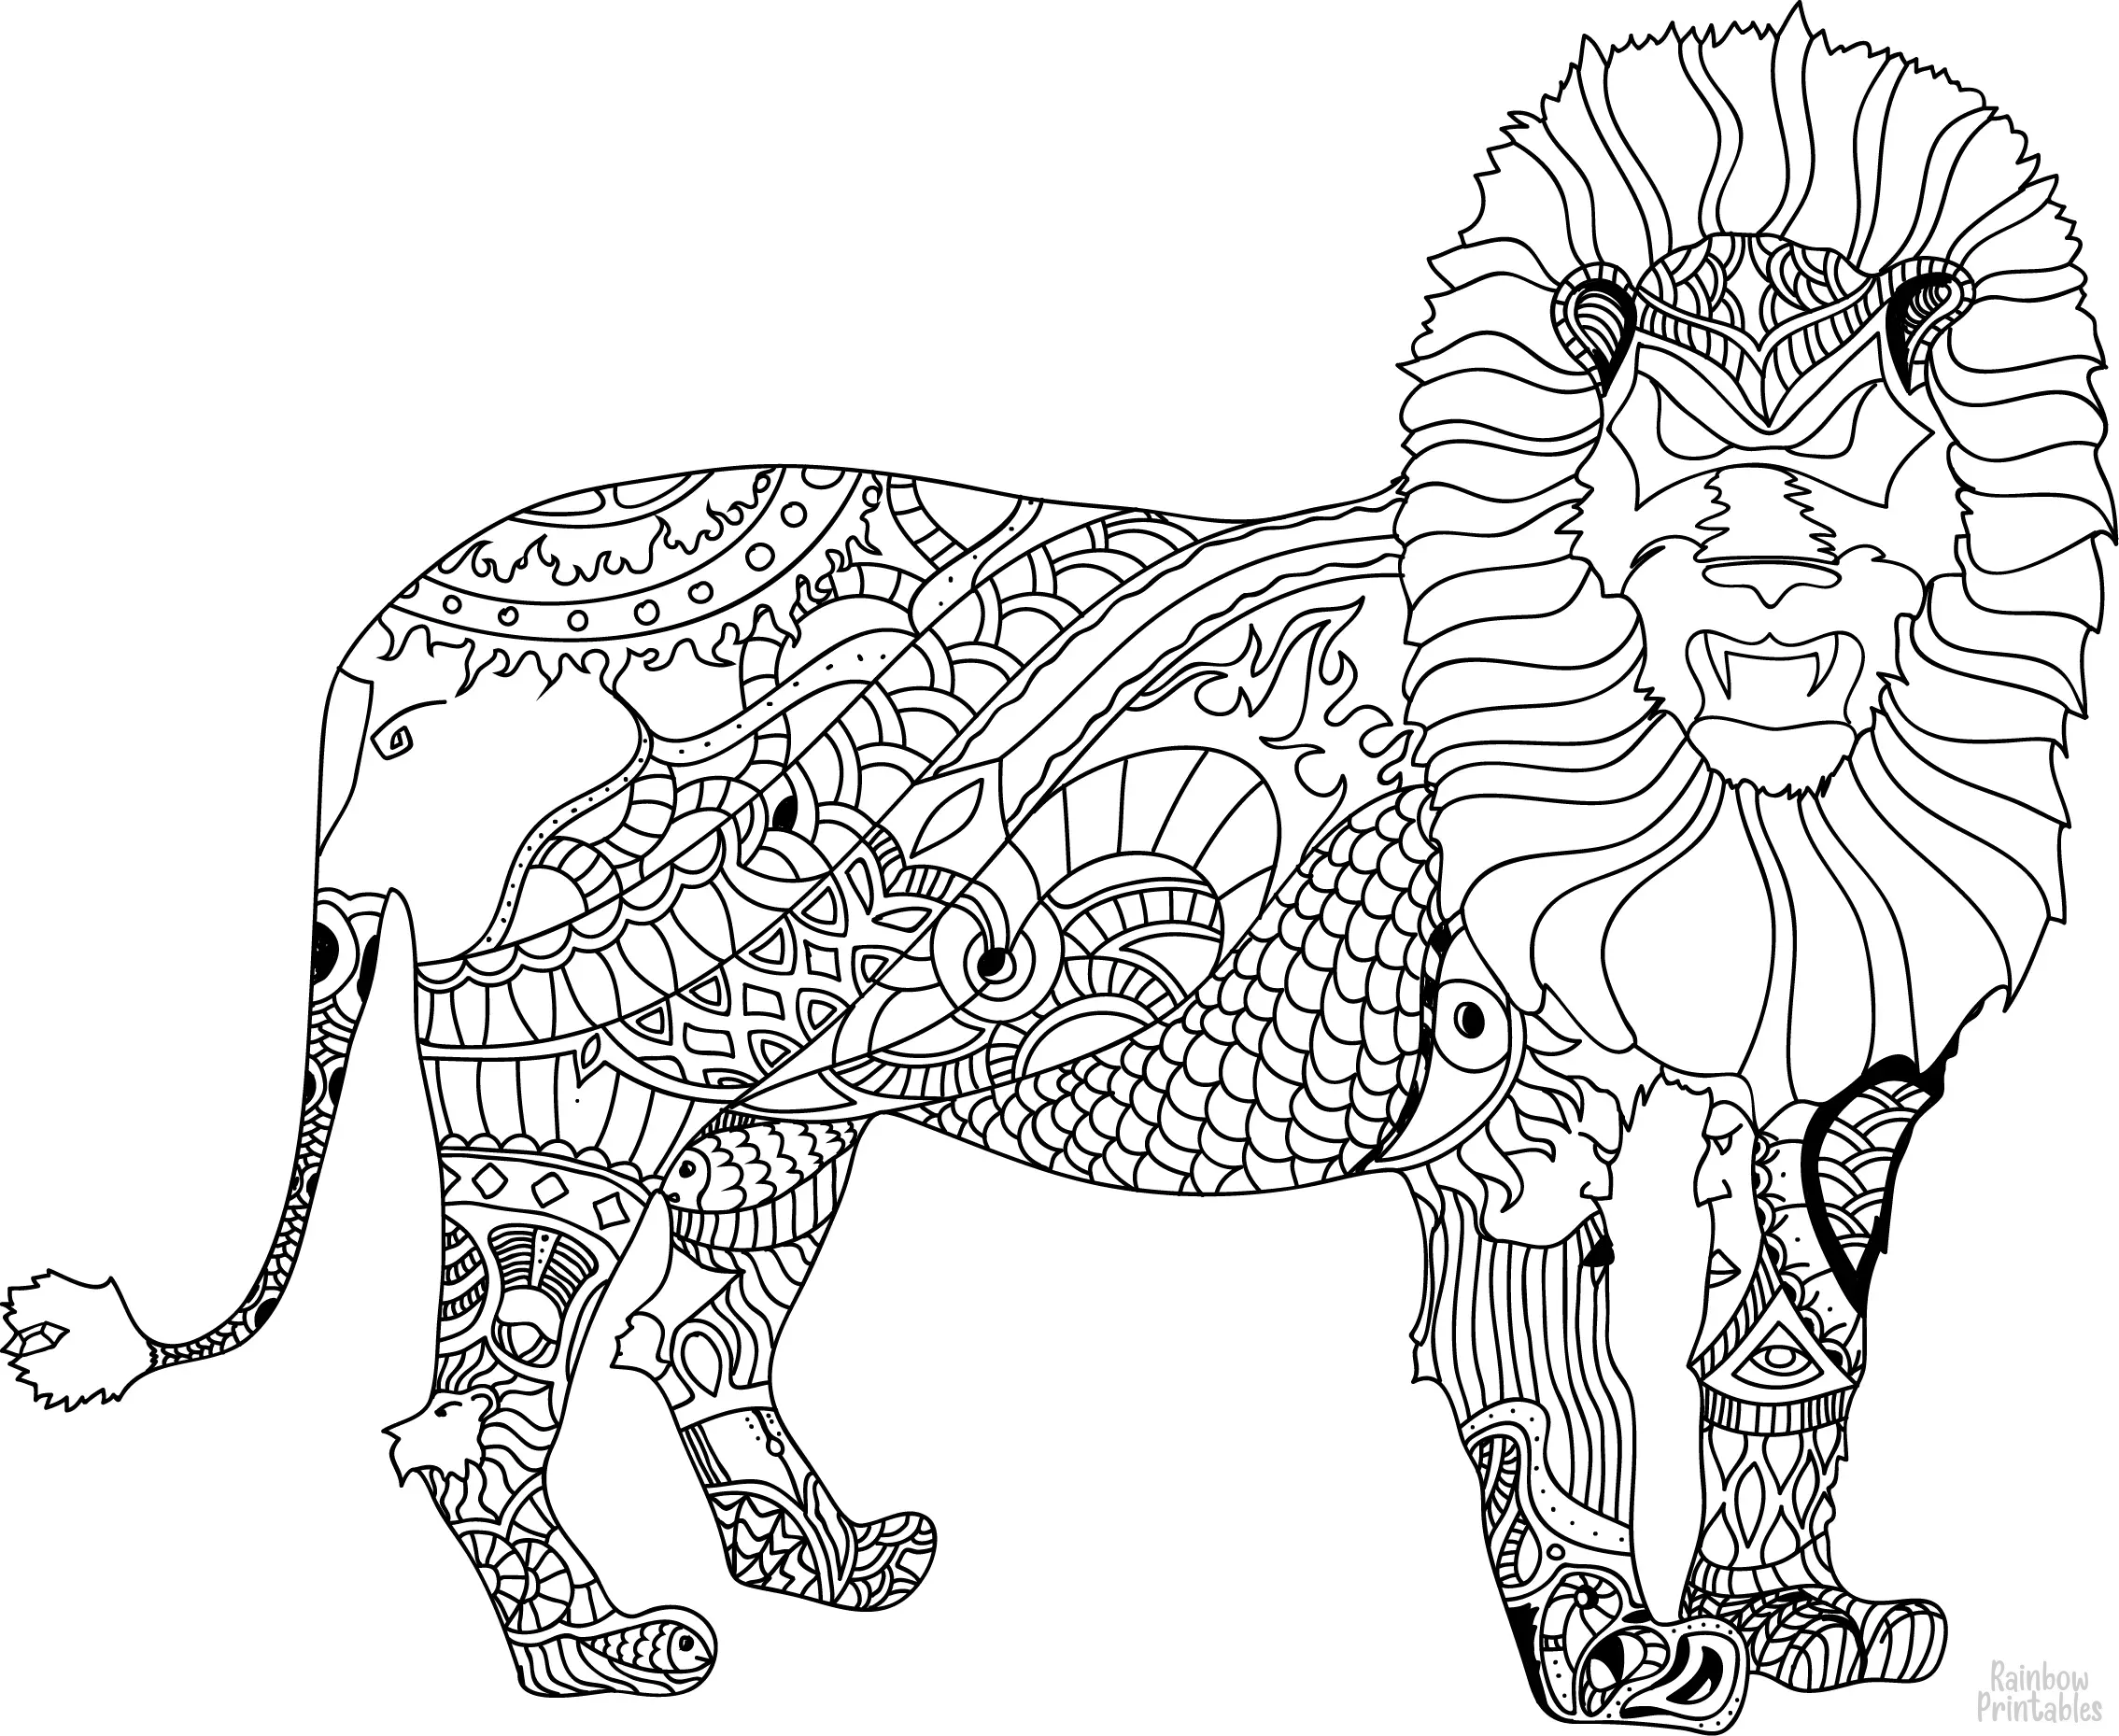 LION DRAWING Mandala Coloring Pages for Kids Adults Boredom Art Activities Line Art